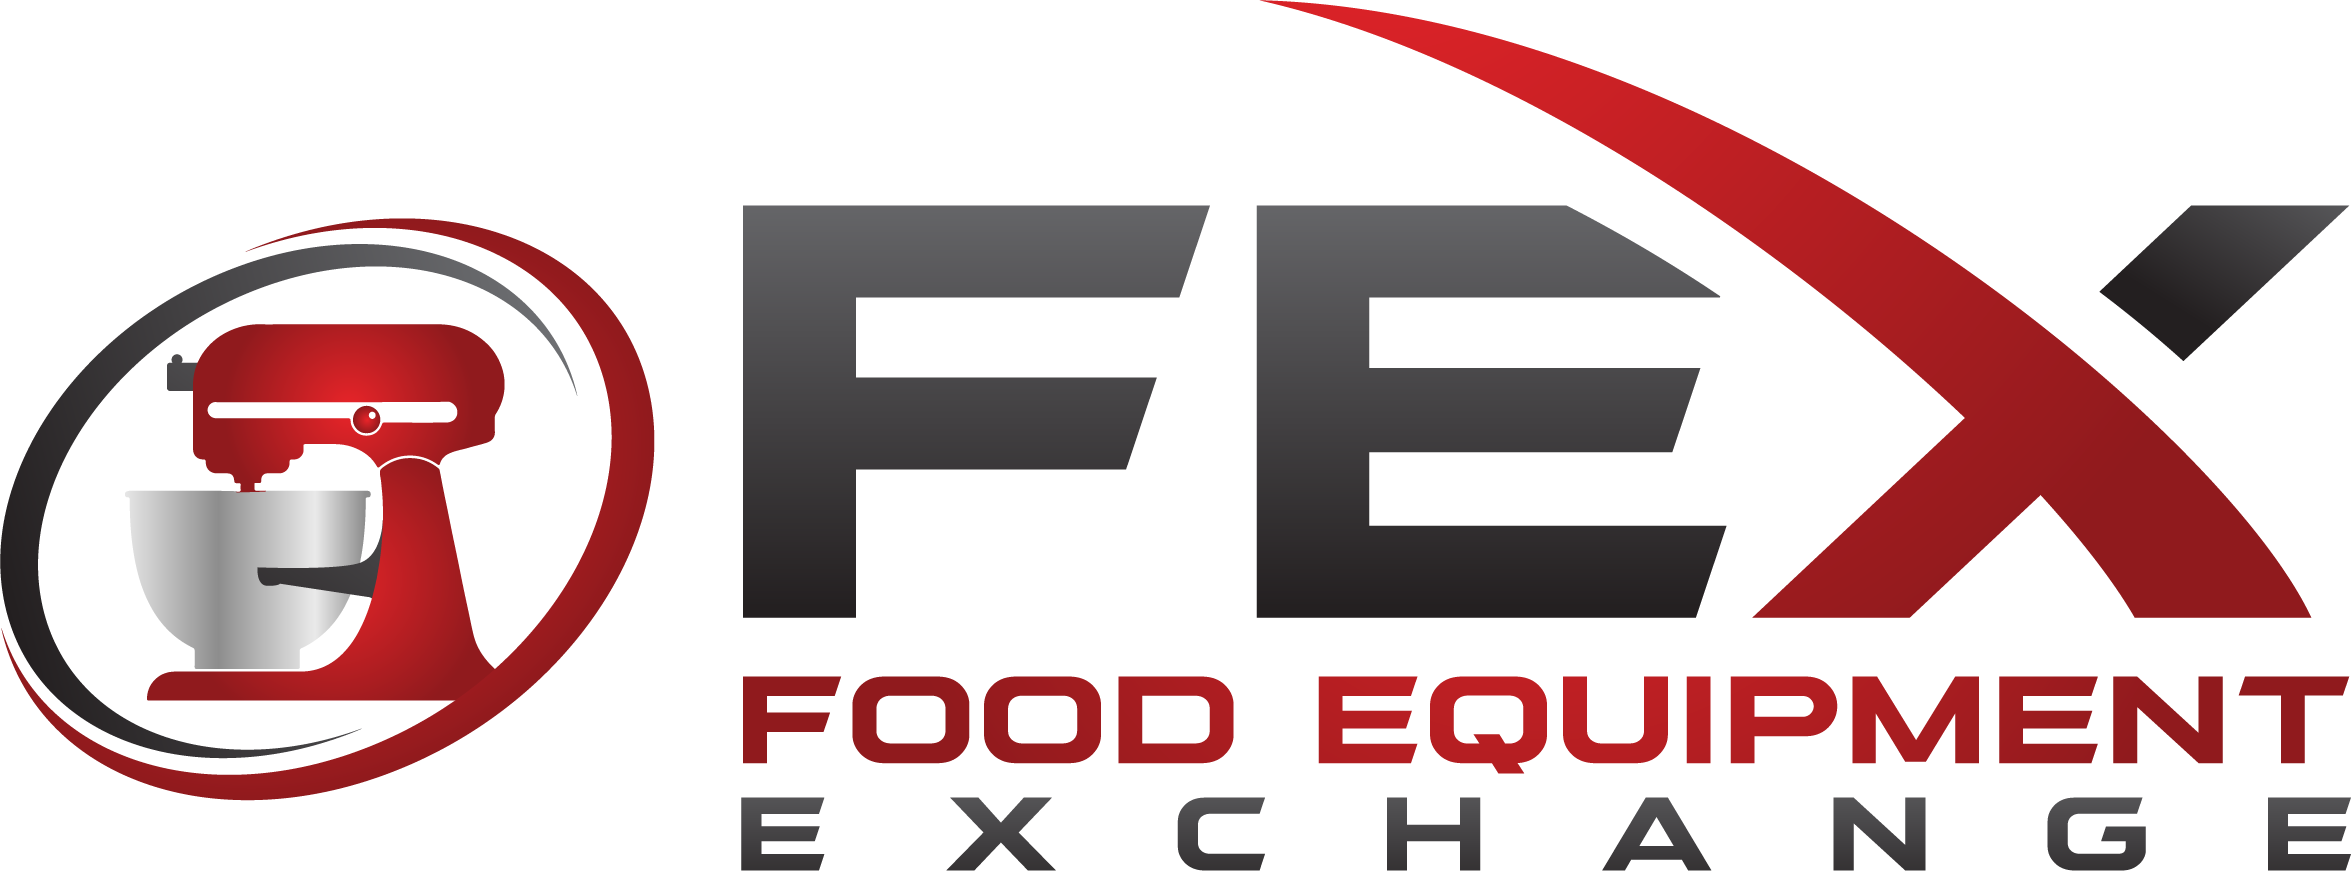 FEX For Food Equipment